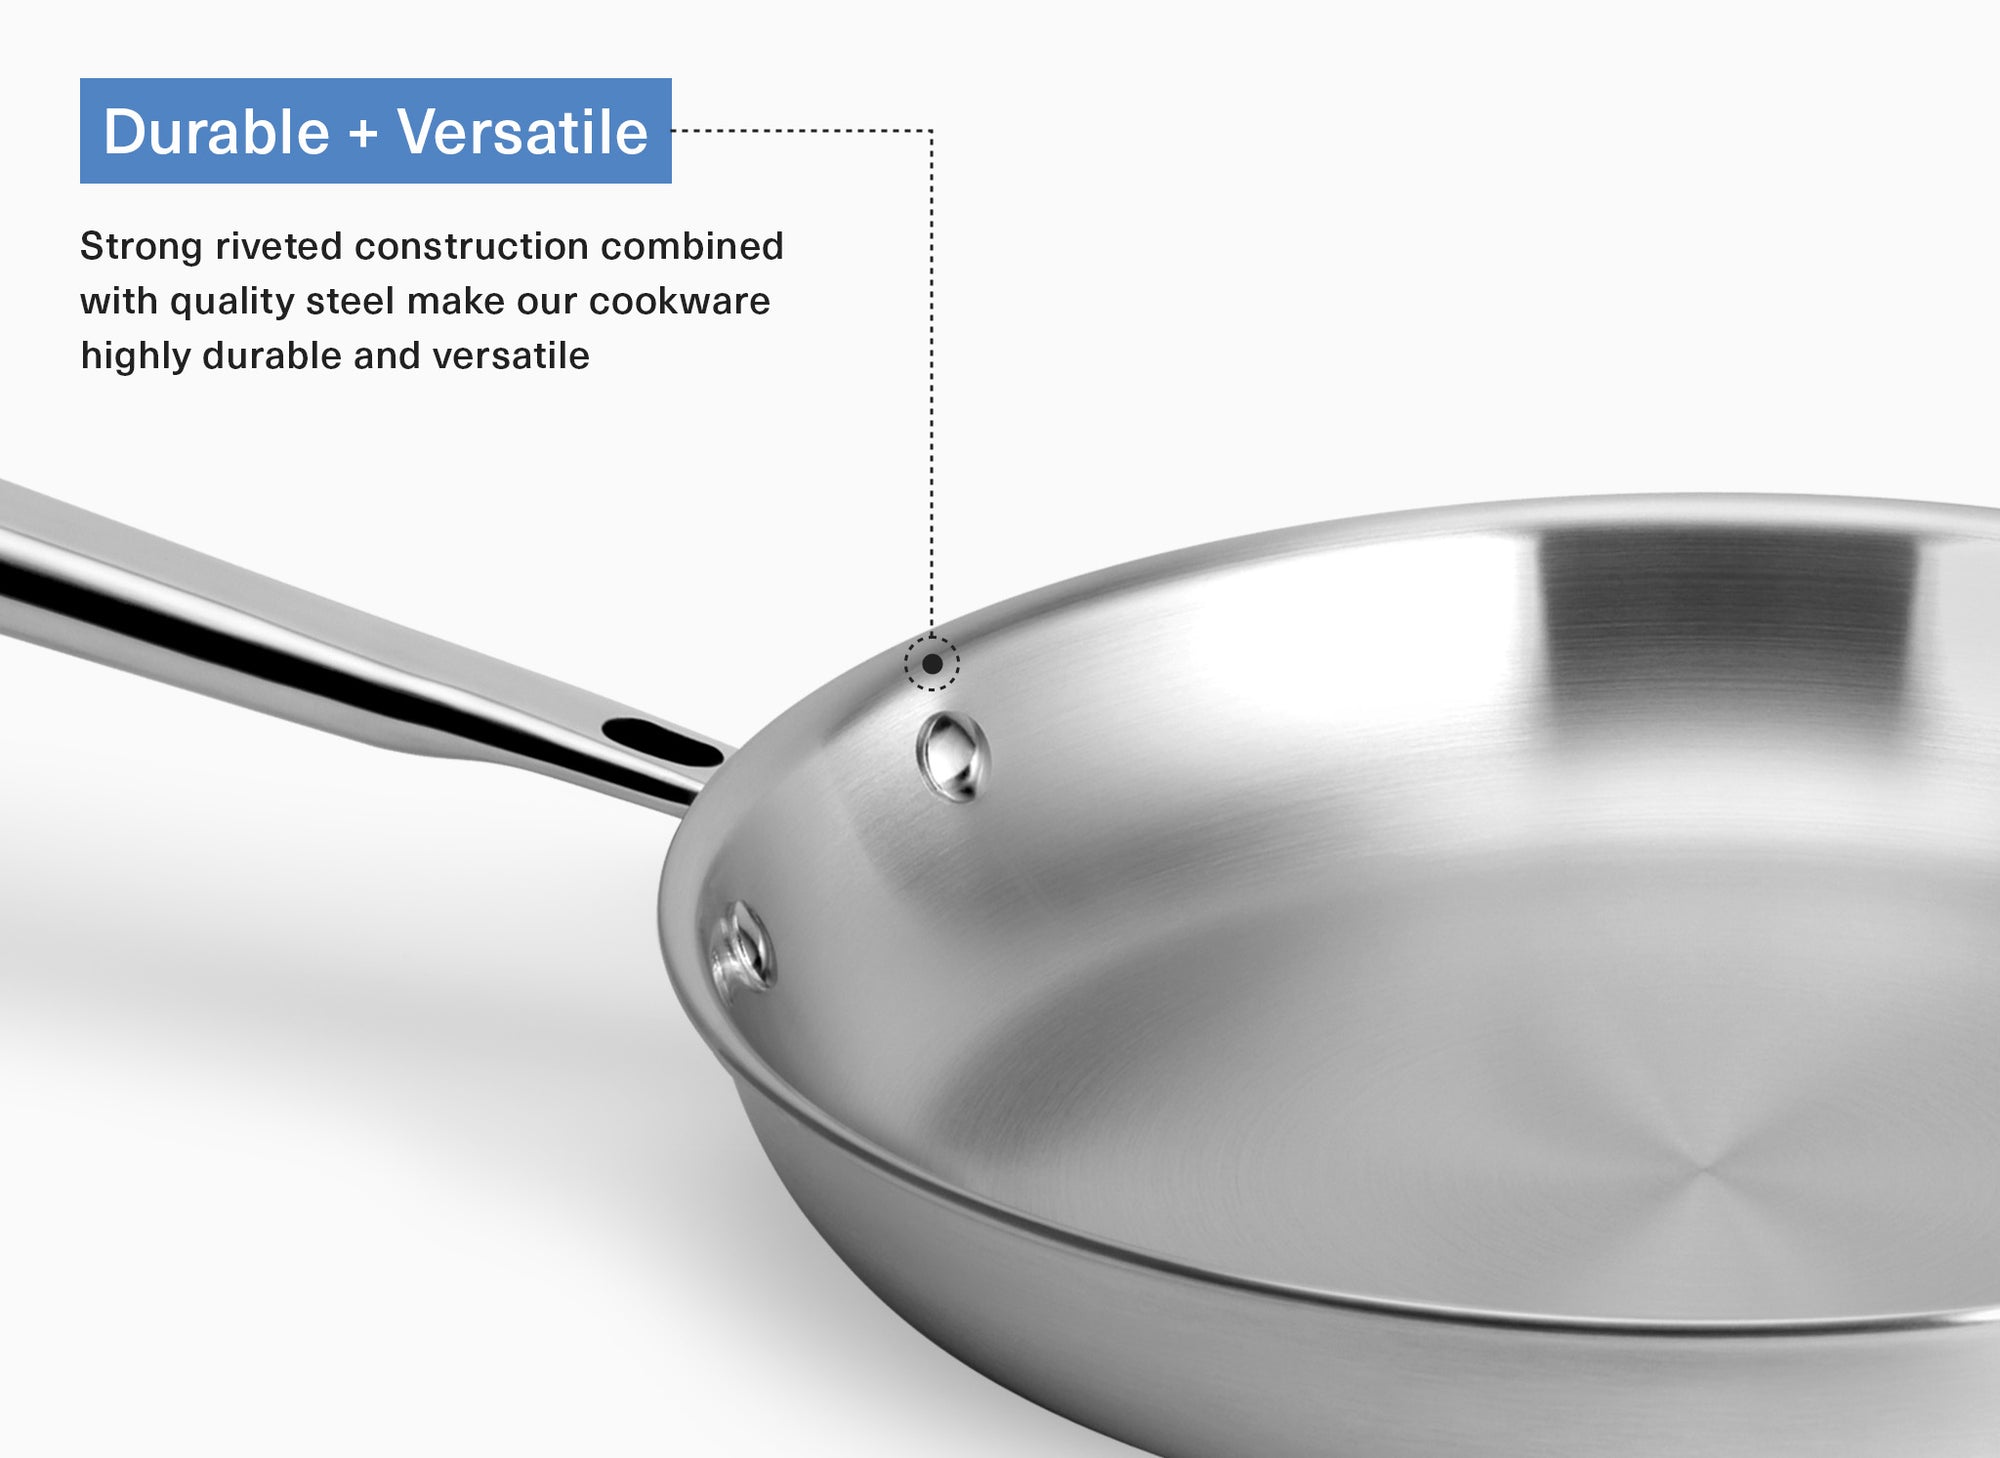 A diagram of the Misen Stainless Steel Pan’s riveted construction and quality steel. Text on the image reads: “Durable and Versatile.”